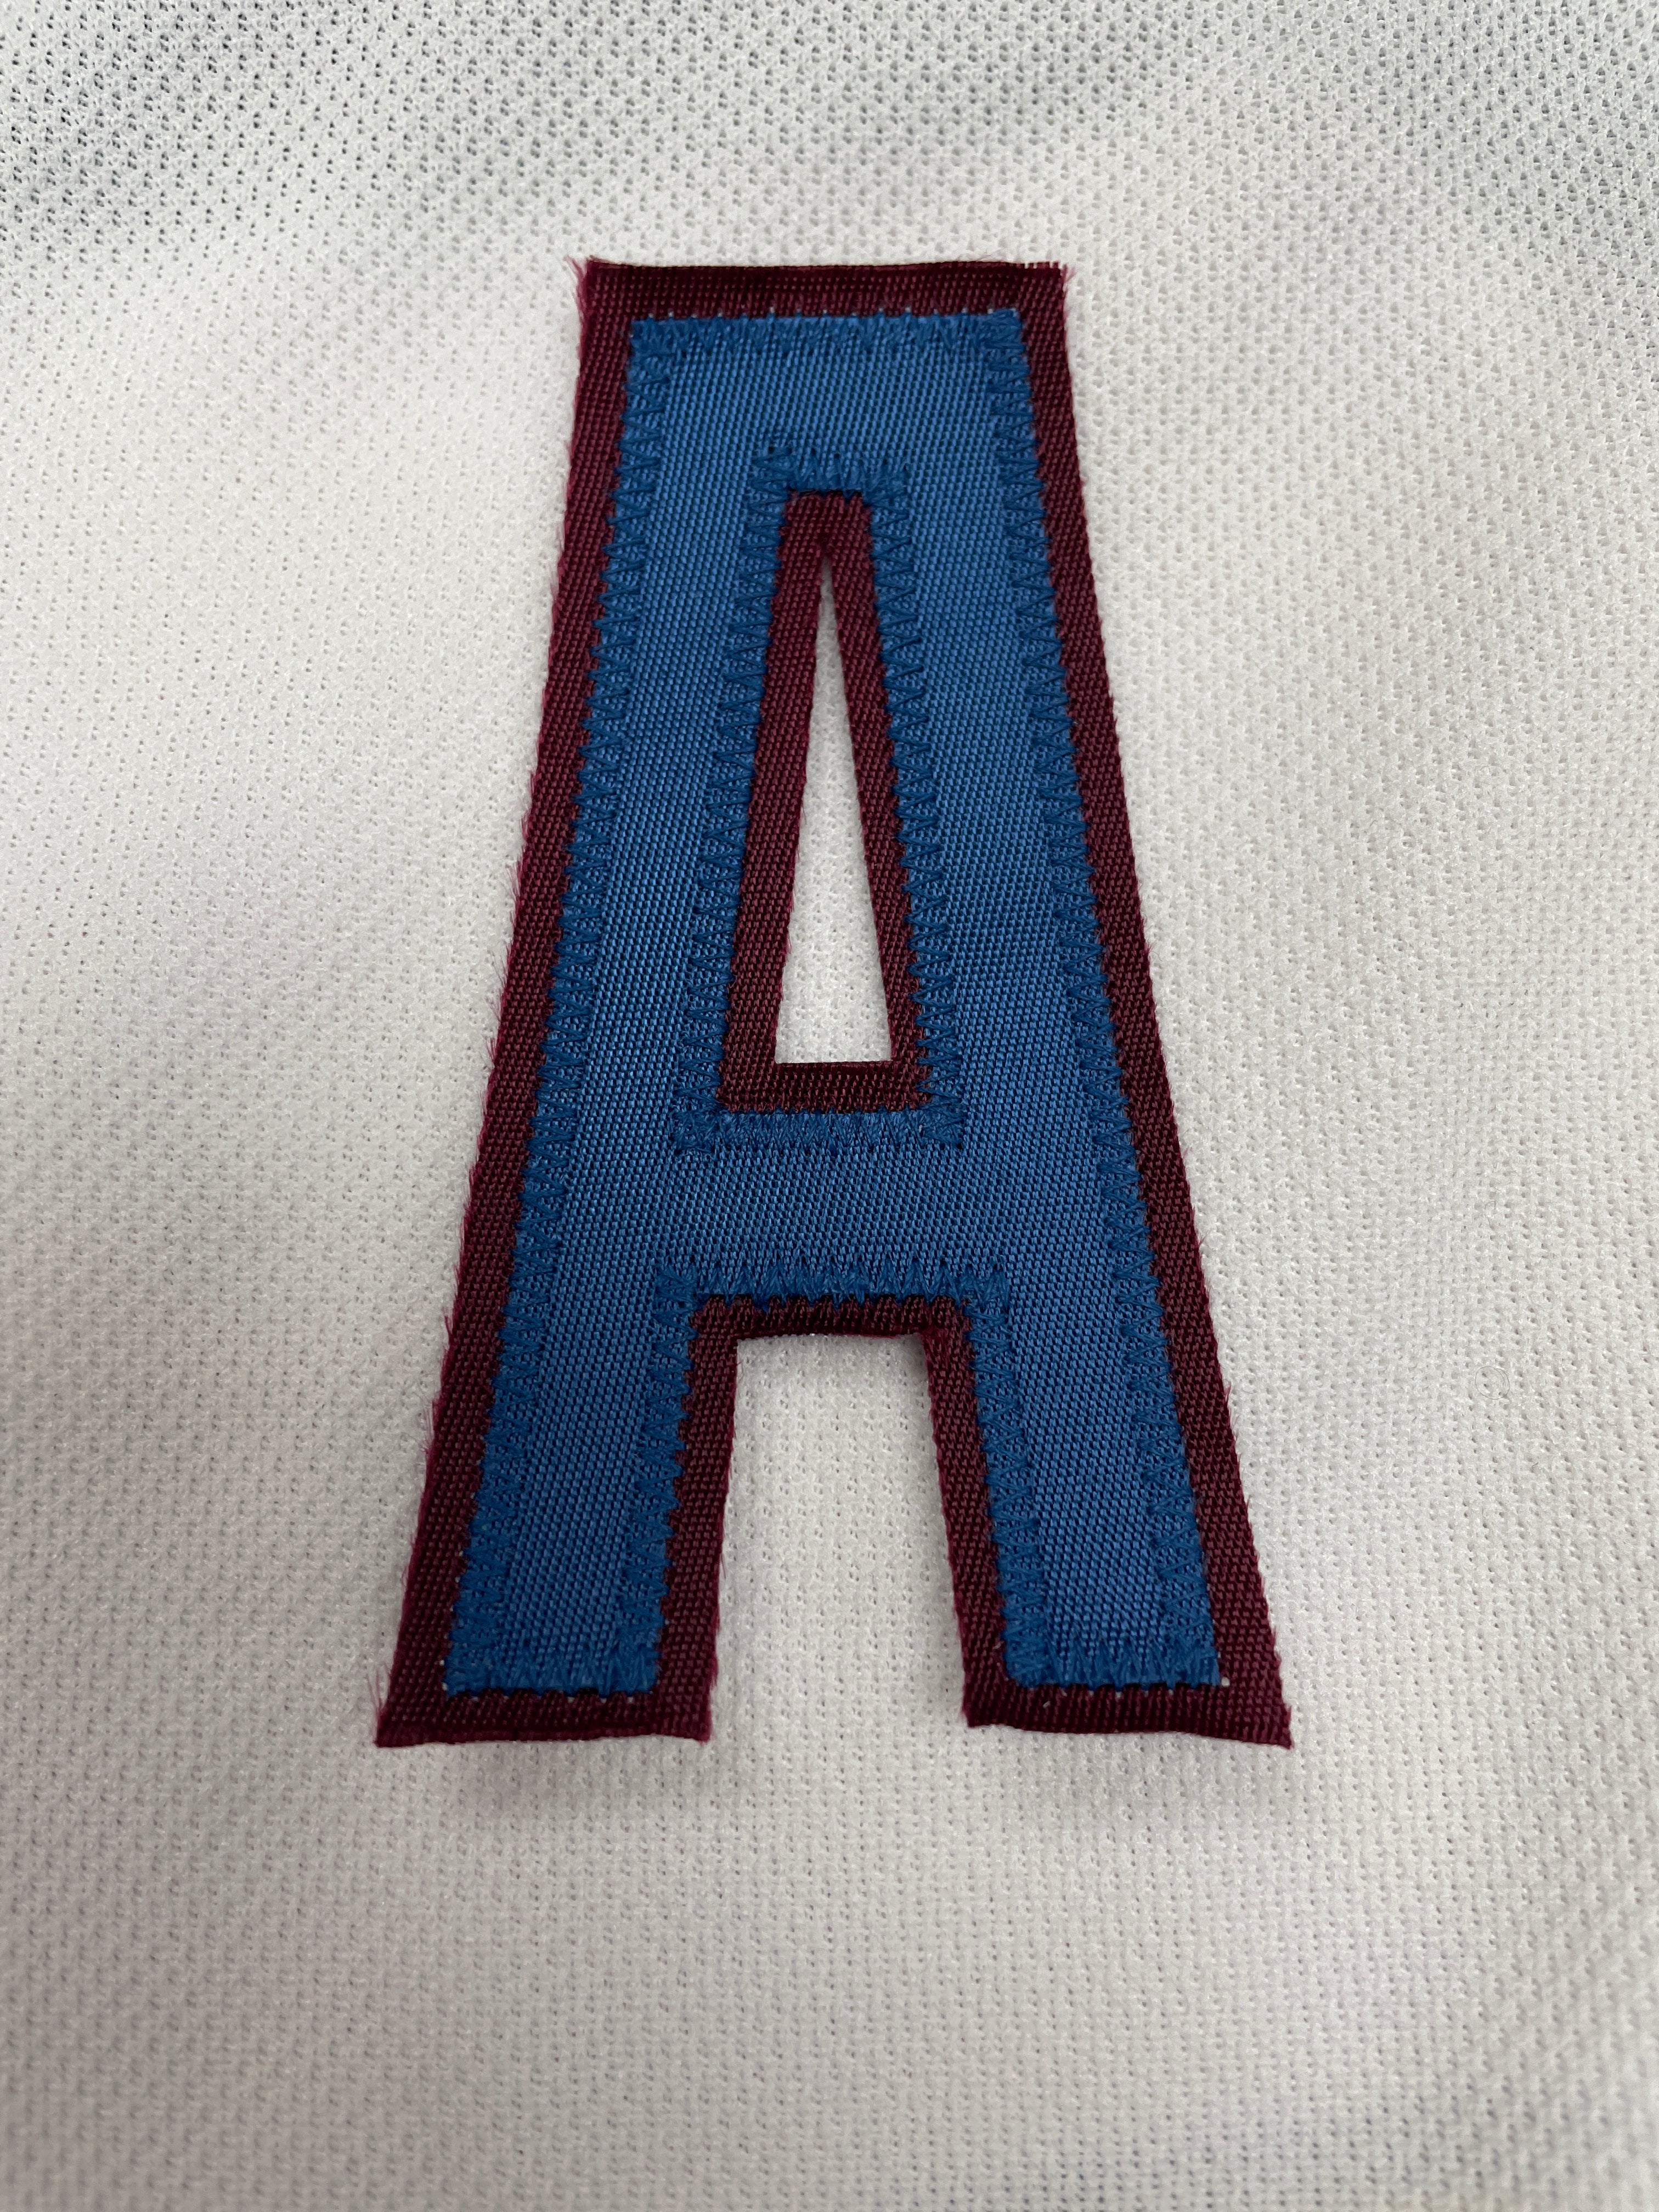 ALTERNATE A OFFICIAL PATCH FOR COLORADO AVALANCHE REVERSE RETRO JERS –  Hockey Authentic